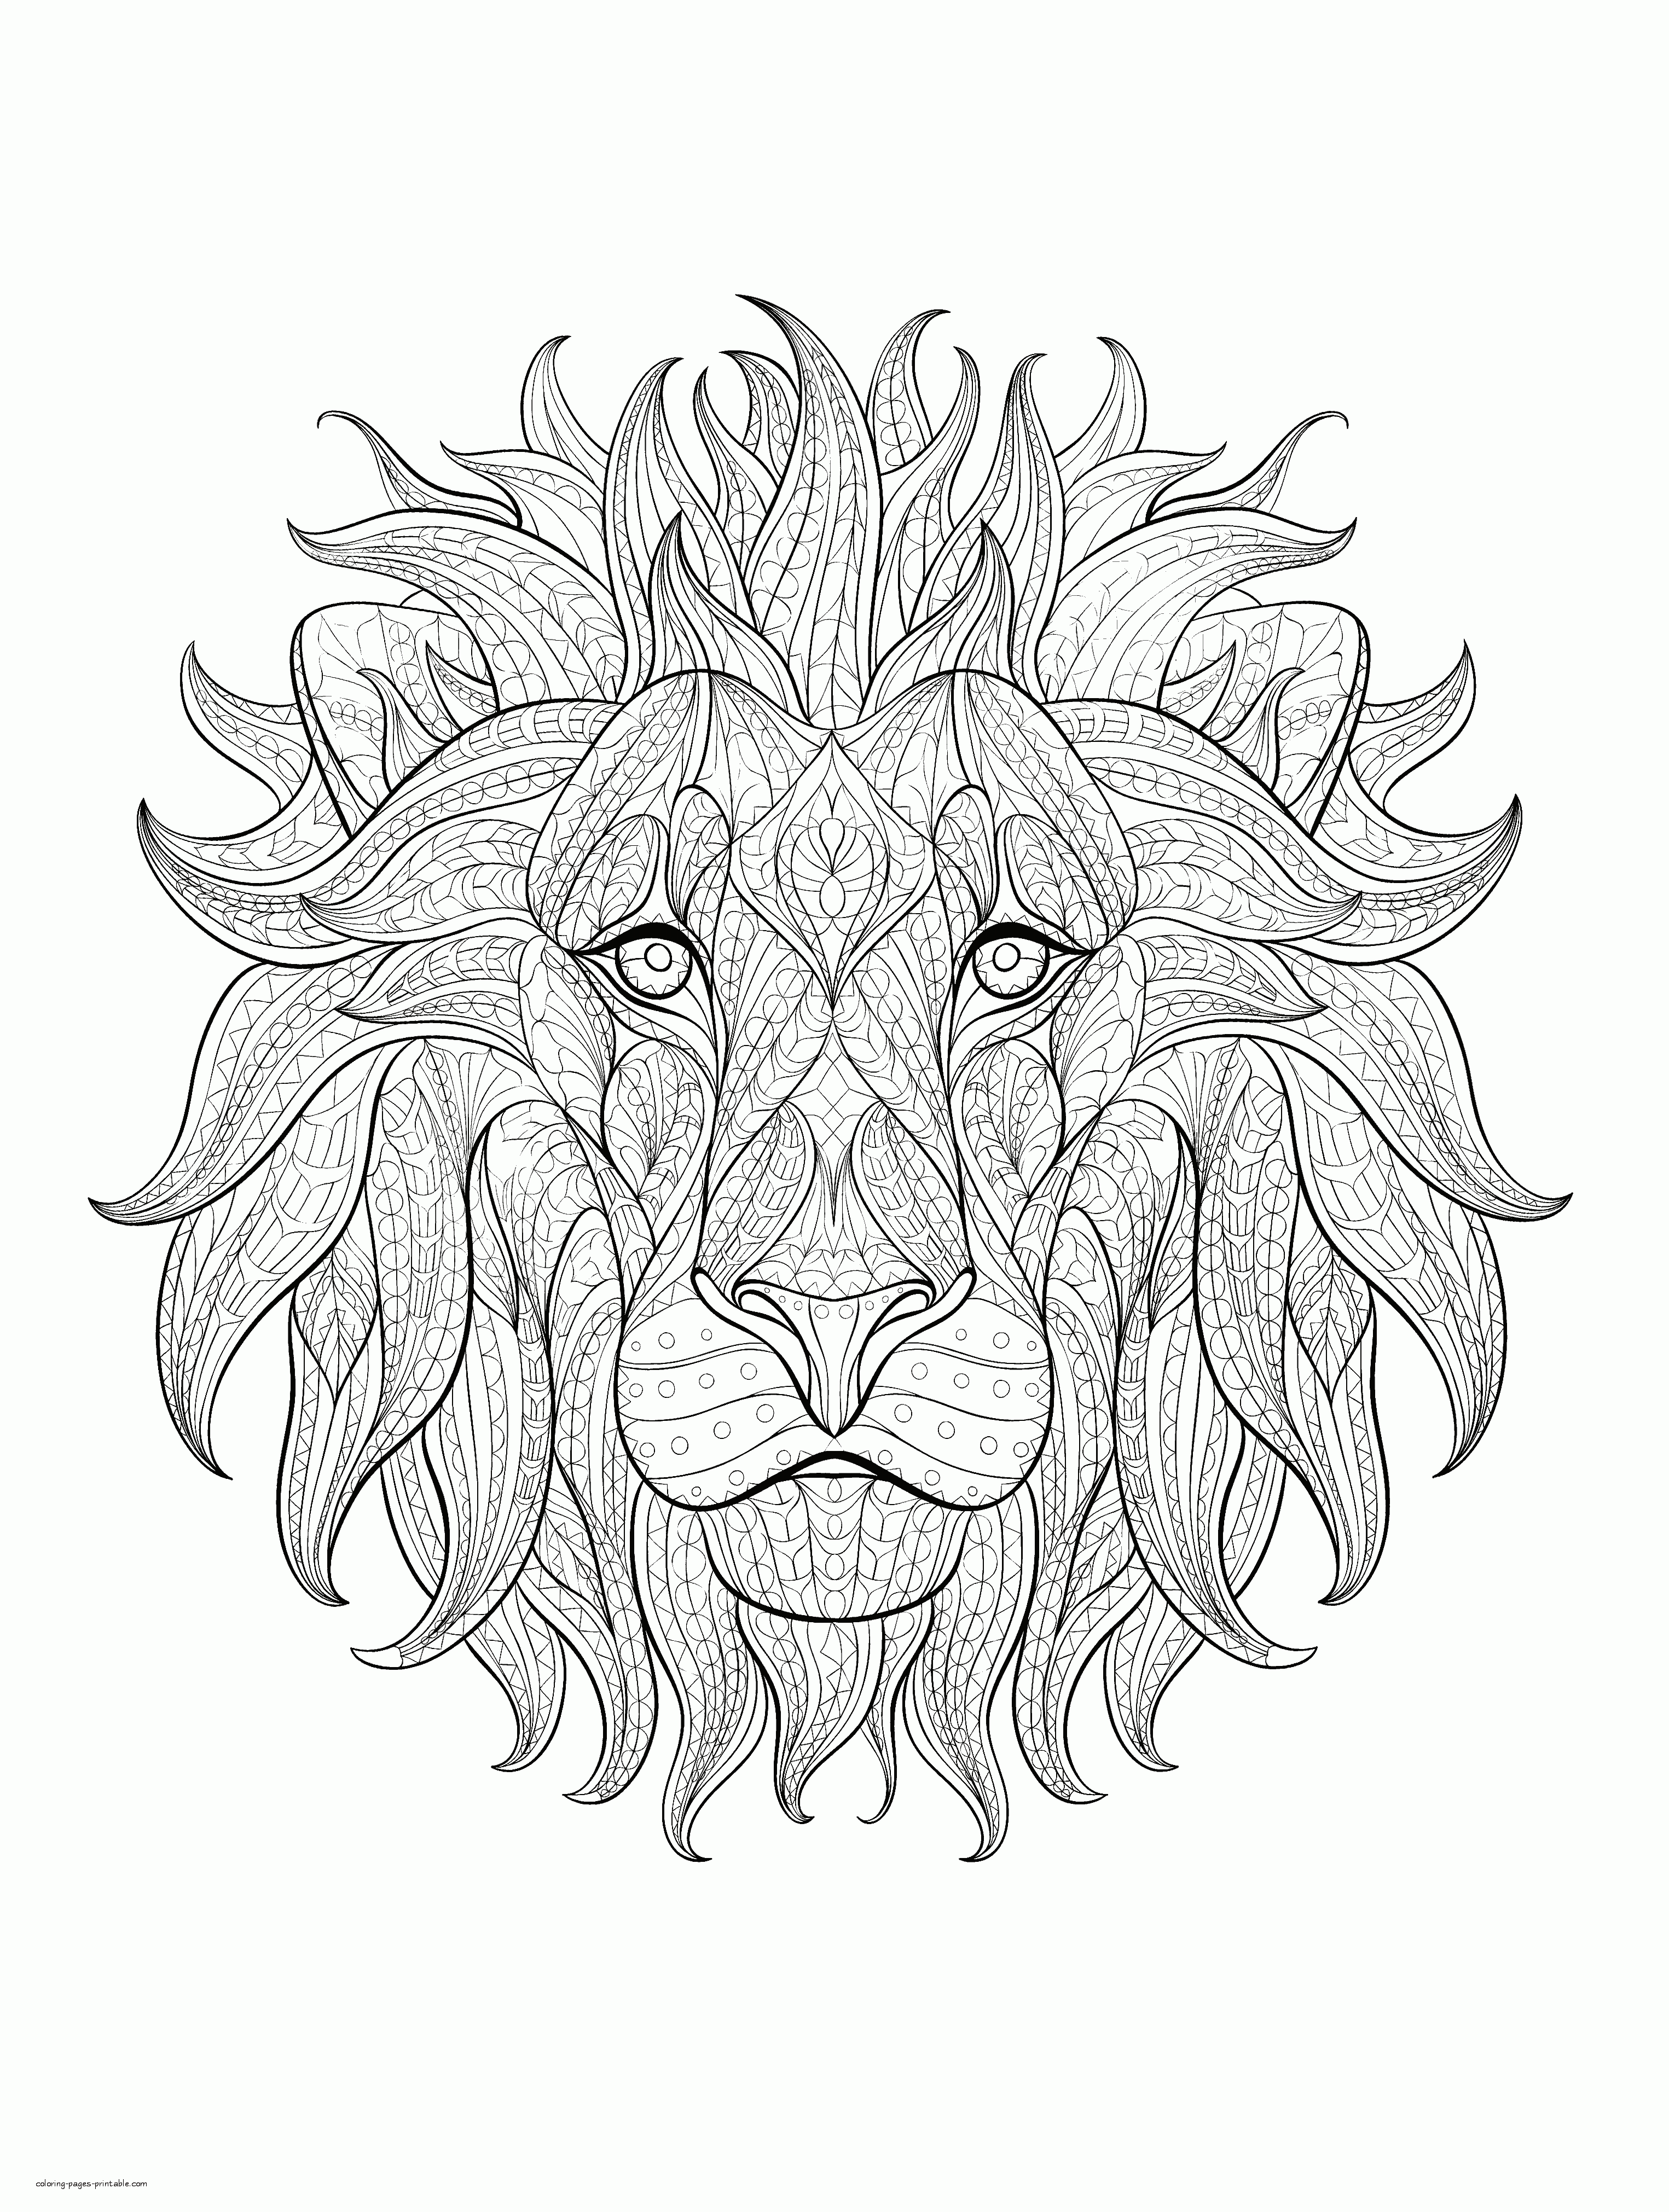 Free Lion Coloring Pages    COLORING PAGES PRINTABLE.COM